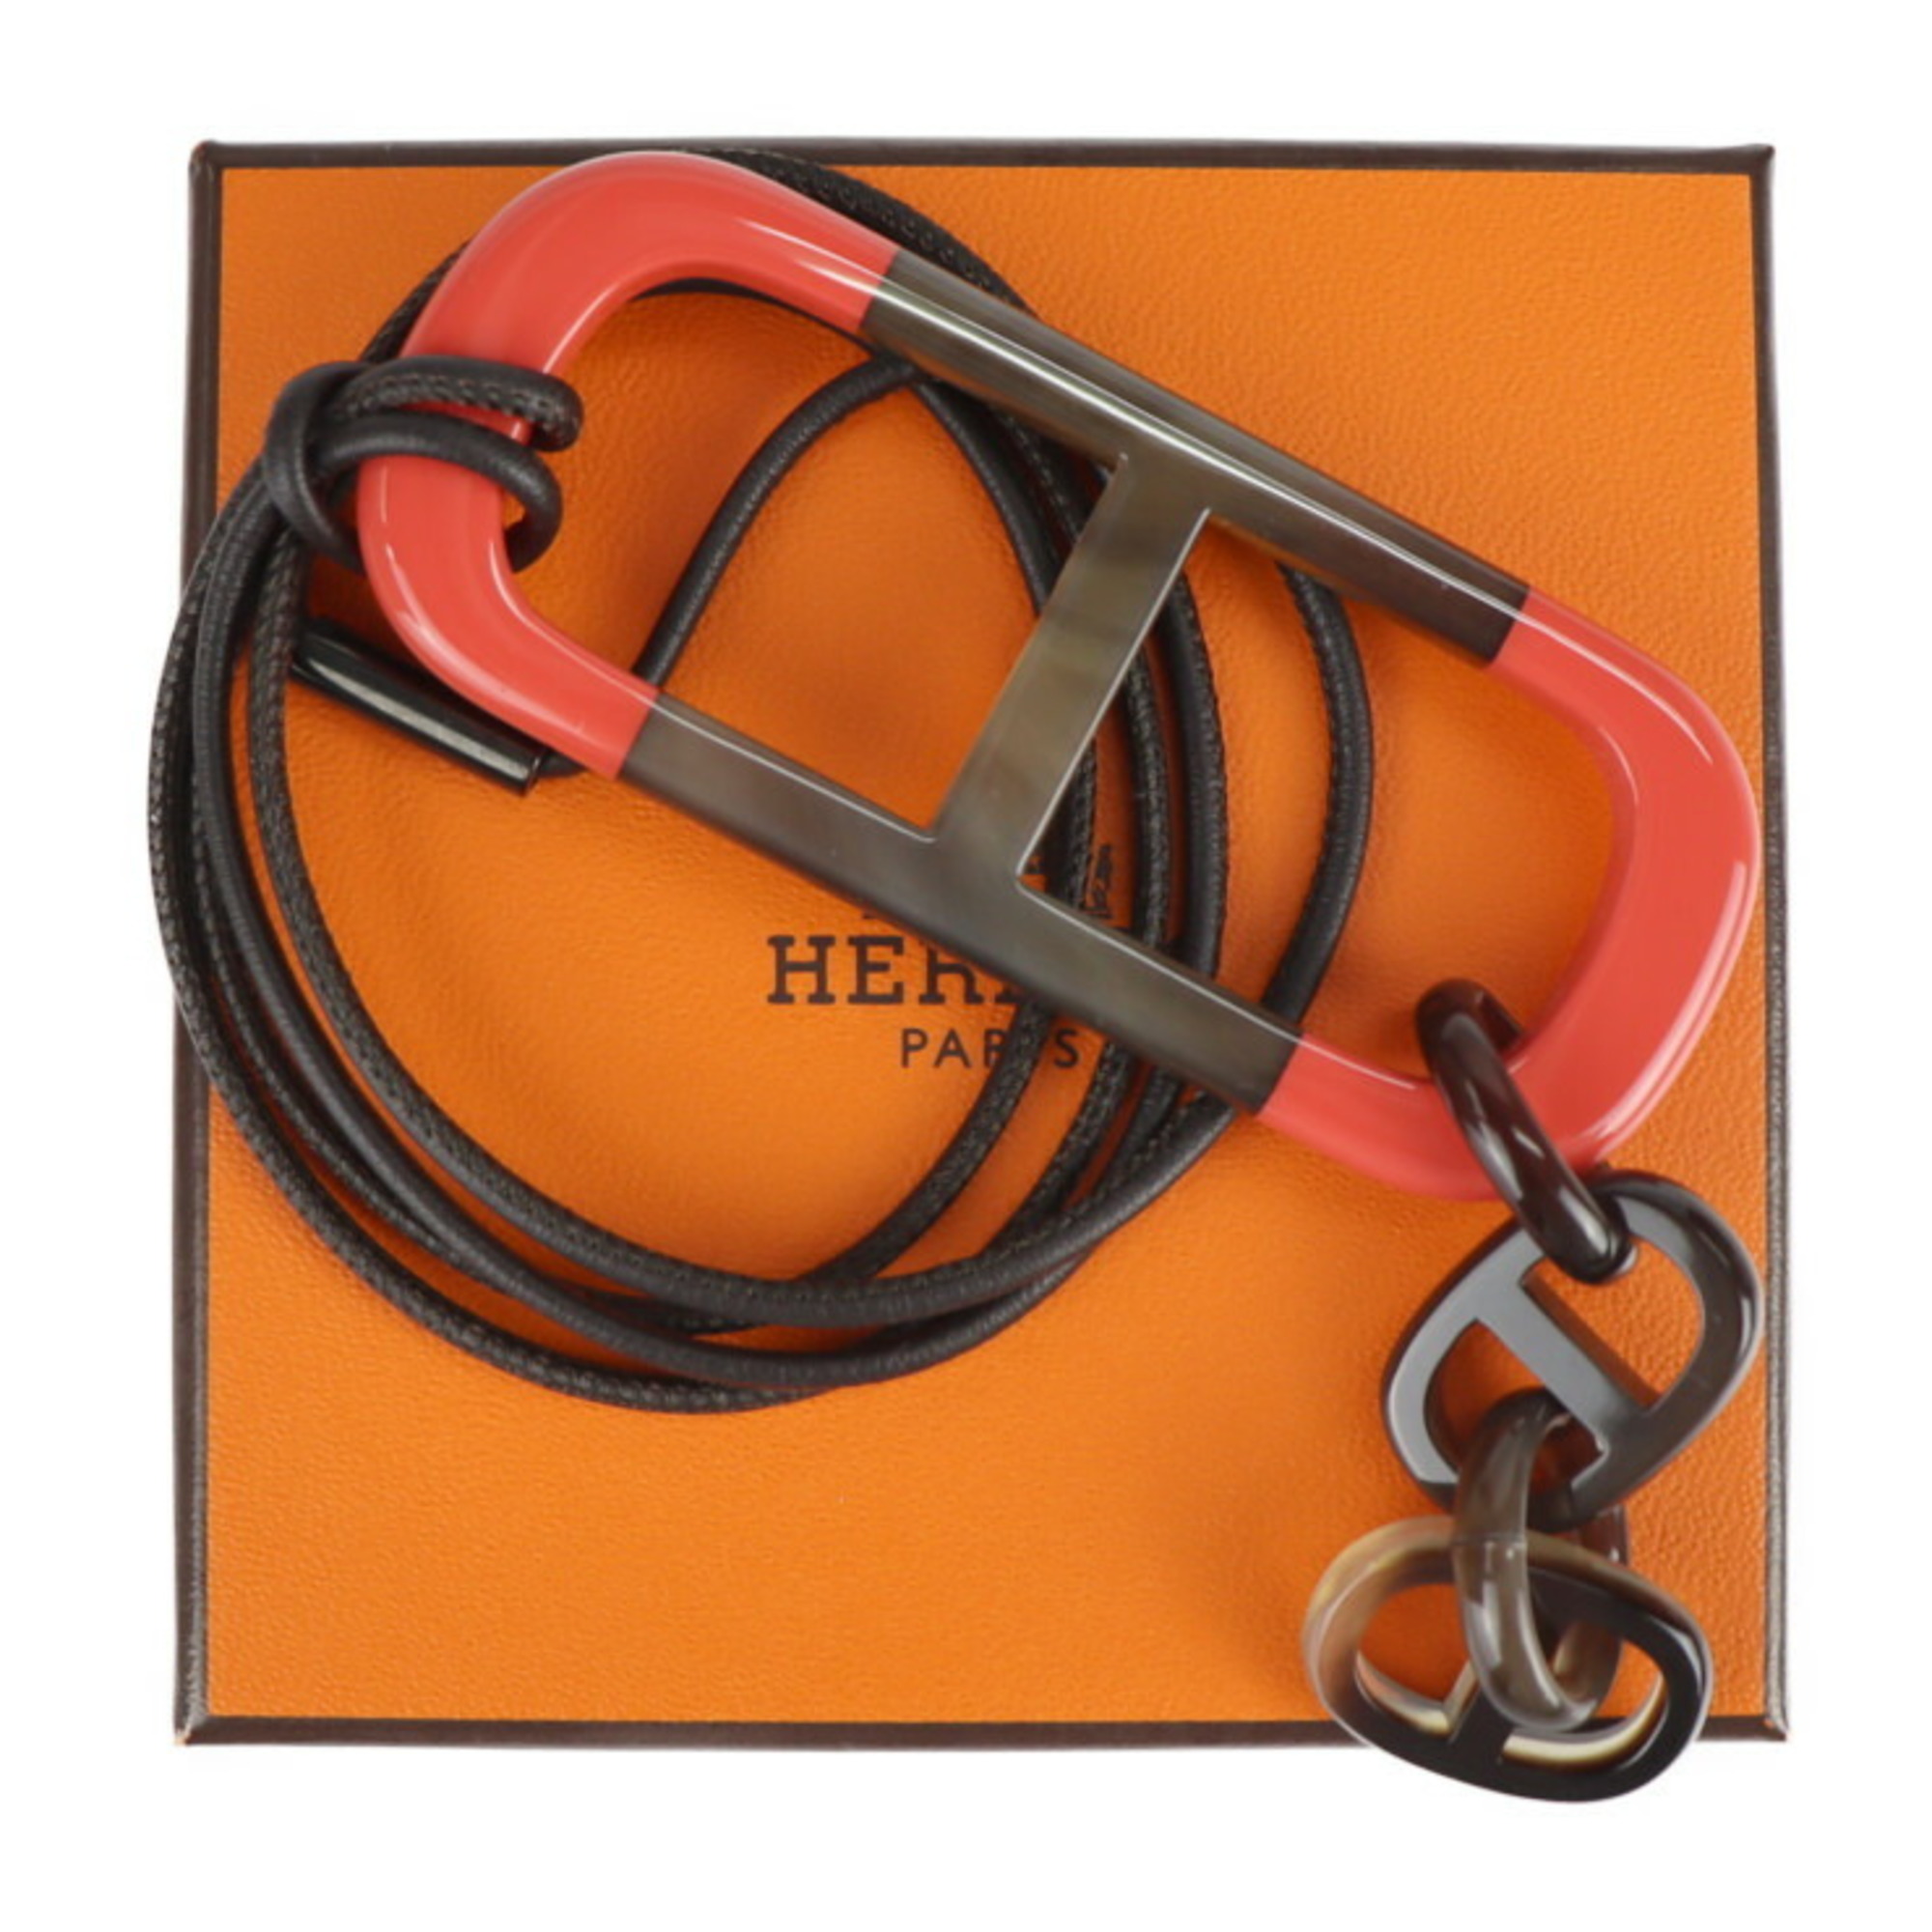 HERMES Hermes Amar Necklace Buffalo Horn Salmon Pink Series Brown Pendant Shane Dunkle Jewelry